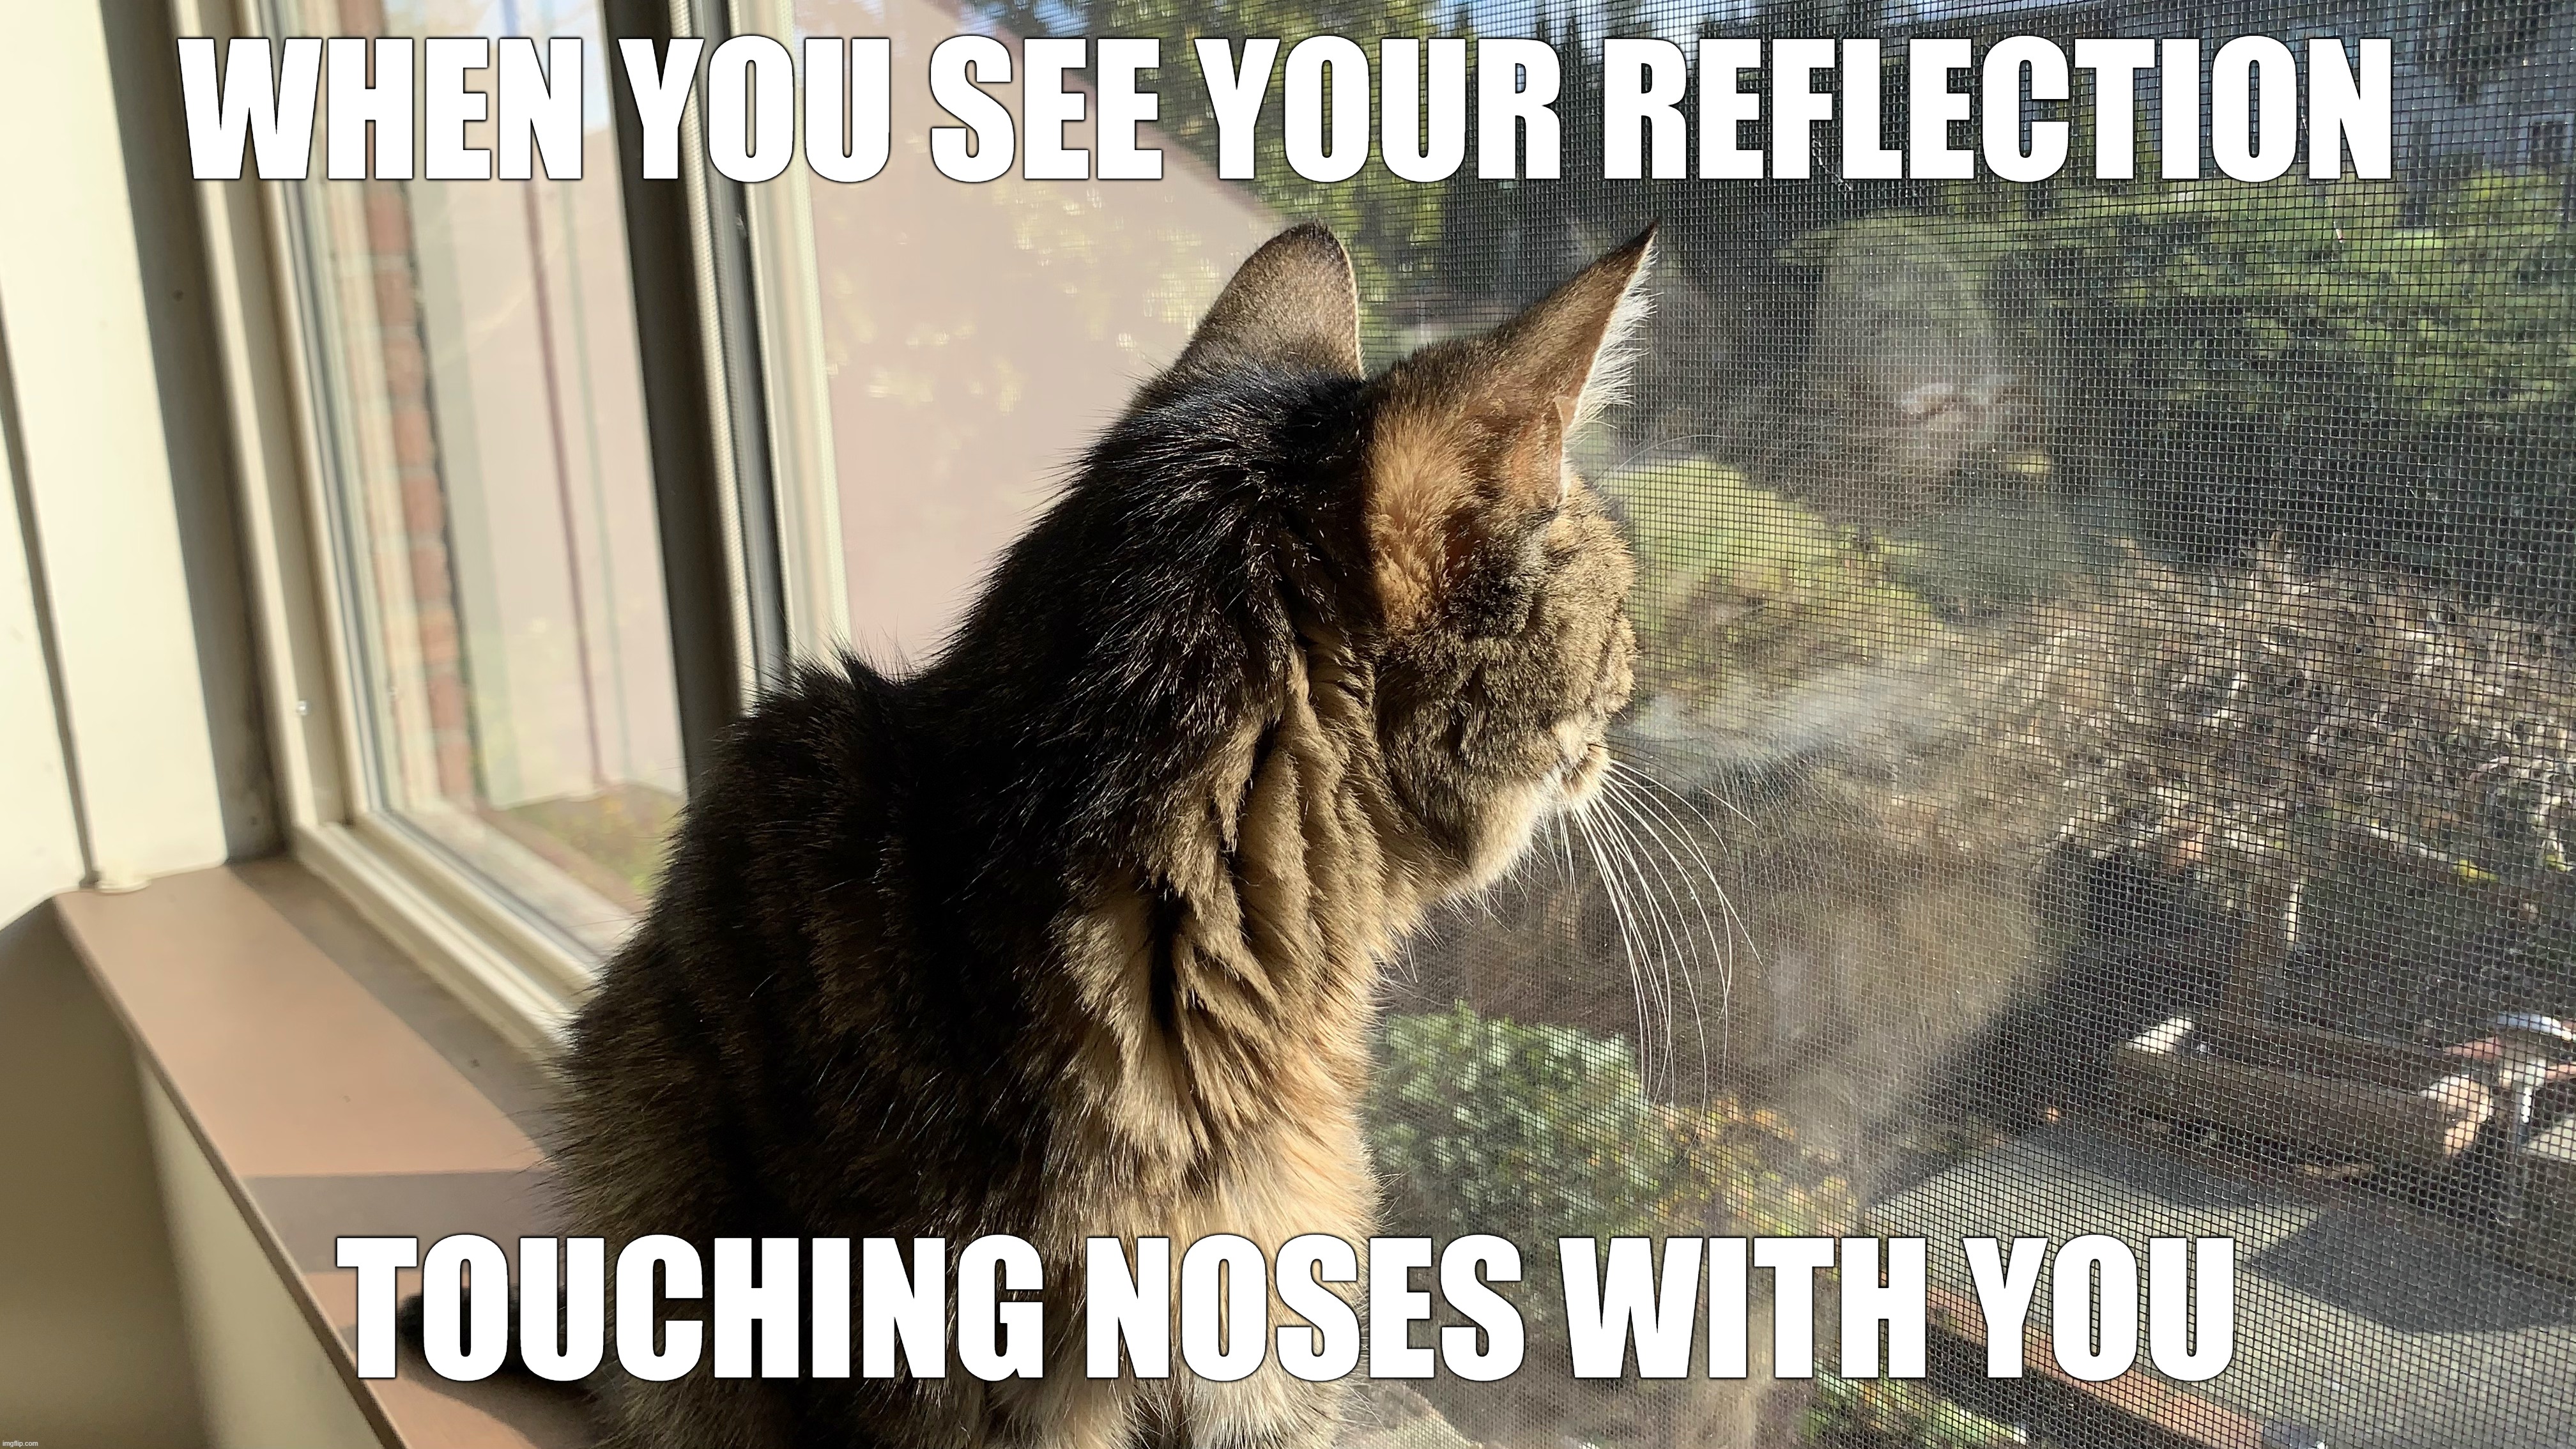 When you see your reflection... (9MP) | WHEN YOU SEE YOUR REFLECTION; TOUCHING NOSES WITH YOU | image tagged in cats,tabby cats | made w/ Imgflip meme maker